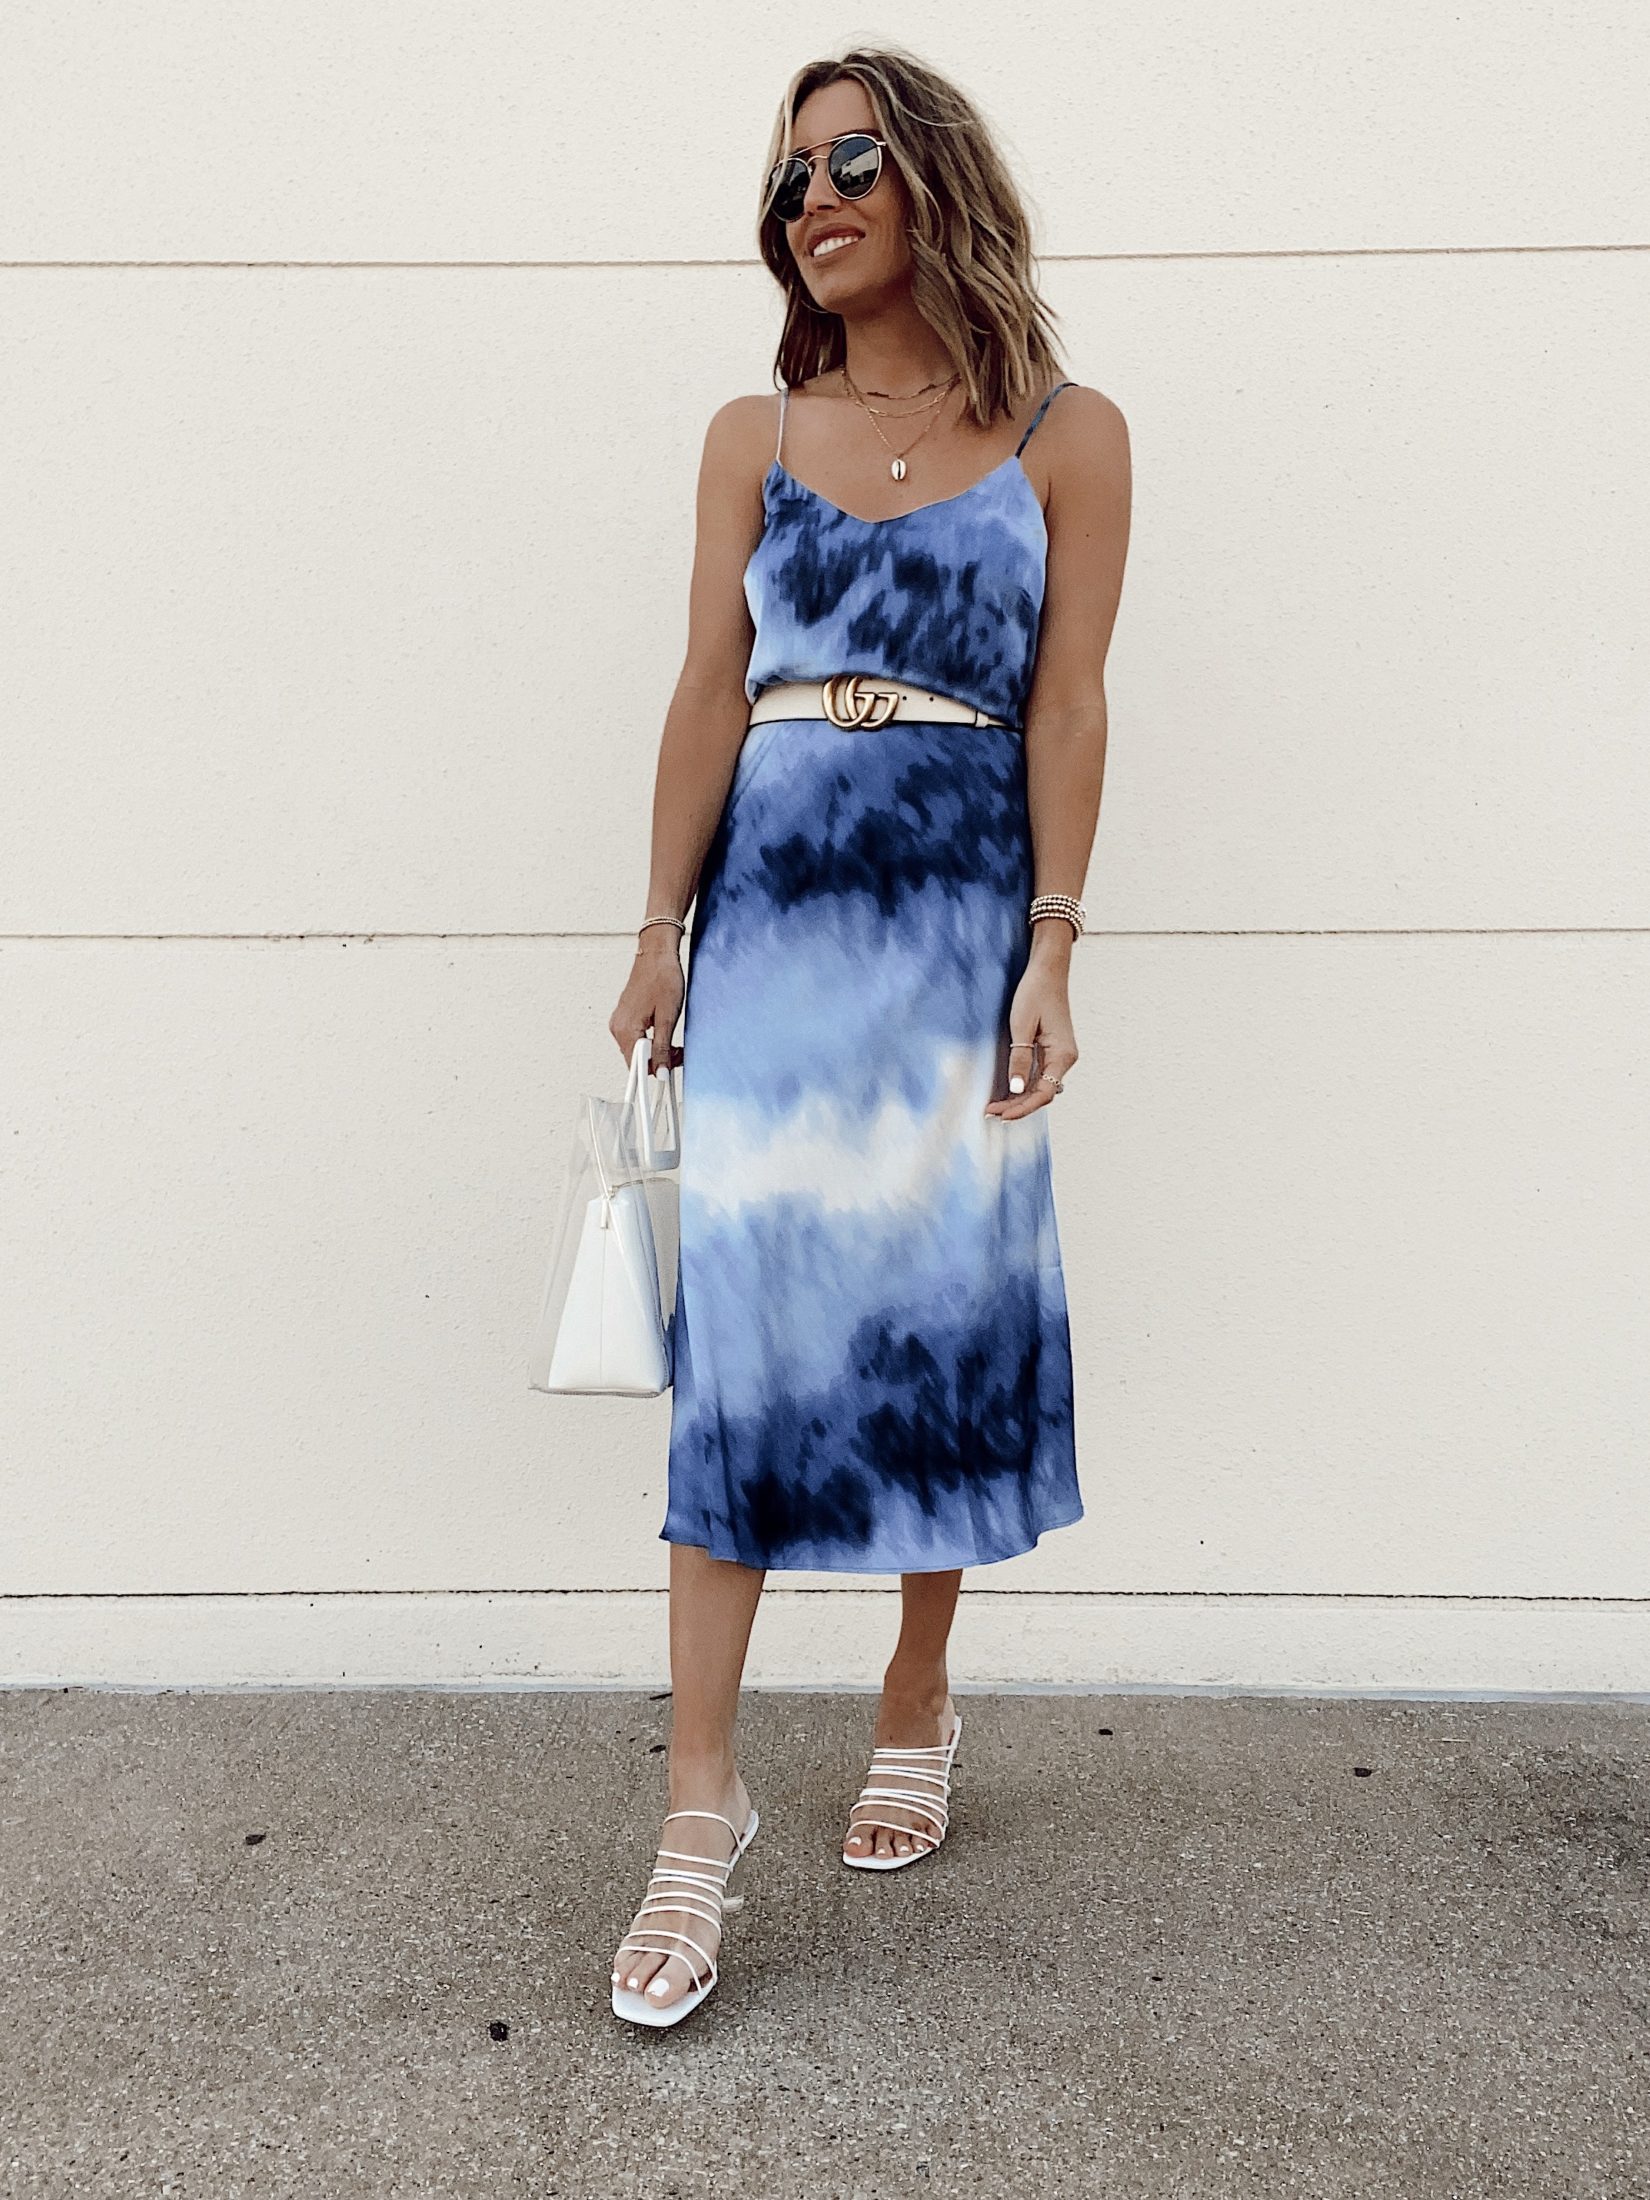 Walmart blue ombre tie dye skirt cami set with white Gucci belt and white square toe strappy sandals